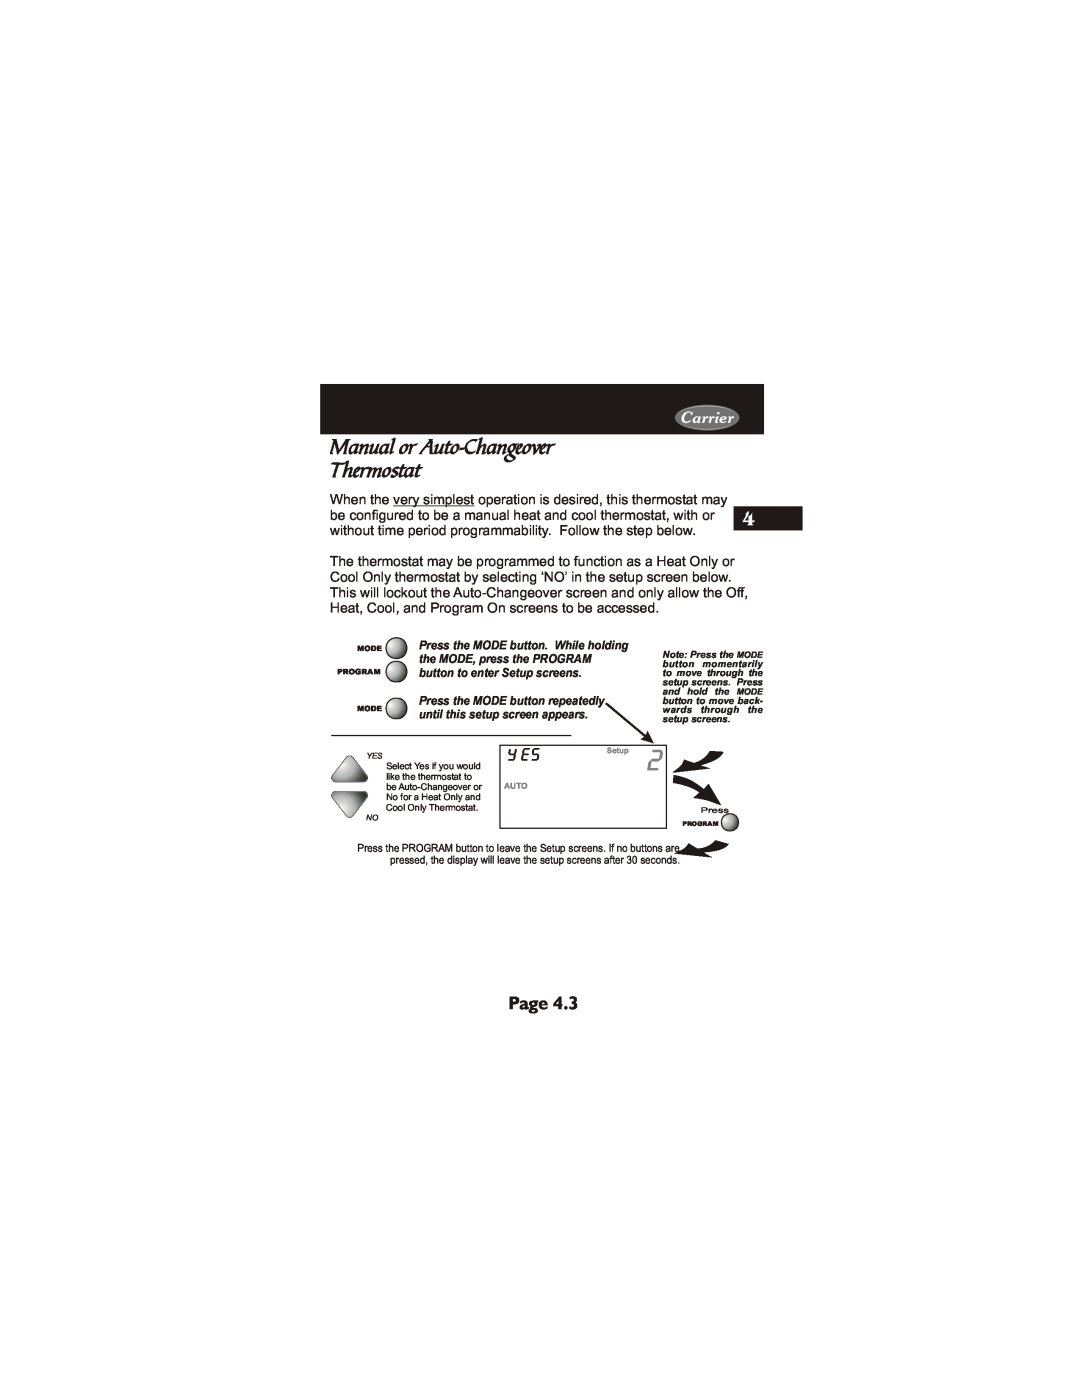 Carrier 33CS450-01 owner manual Manual or Auto-Changeover Thermostat, Page, Carrier 